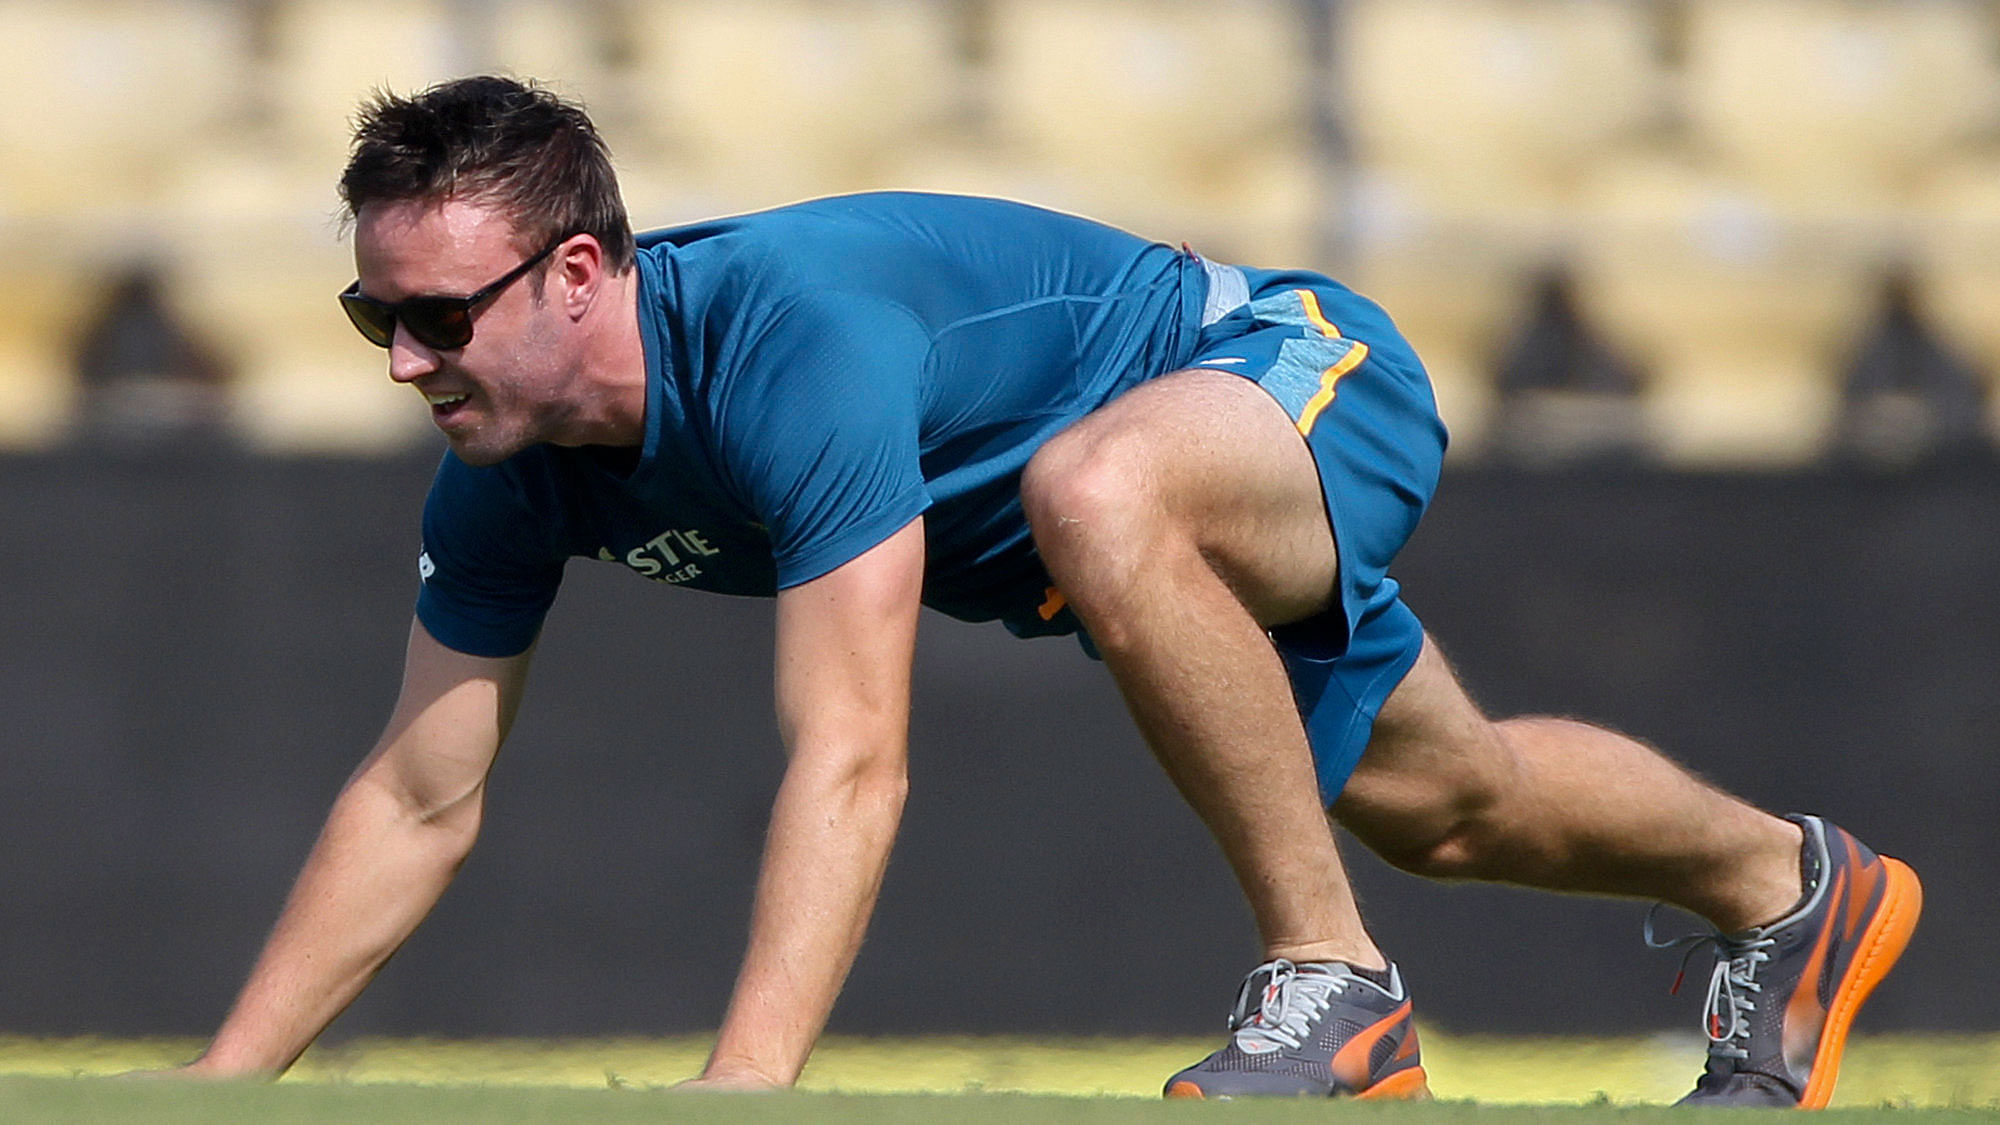 AB de Villiers at the team’s practise session in Nagpur on the eve of the third Test. (Photo: AP)